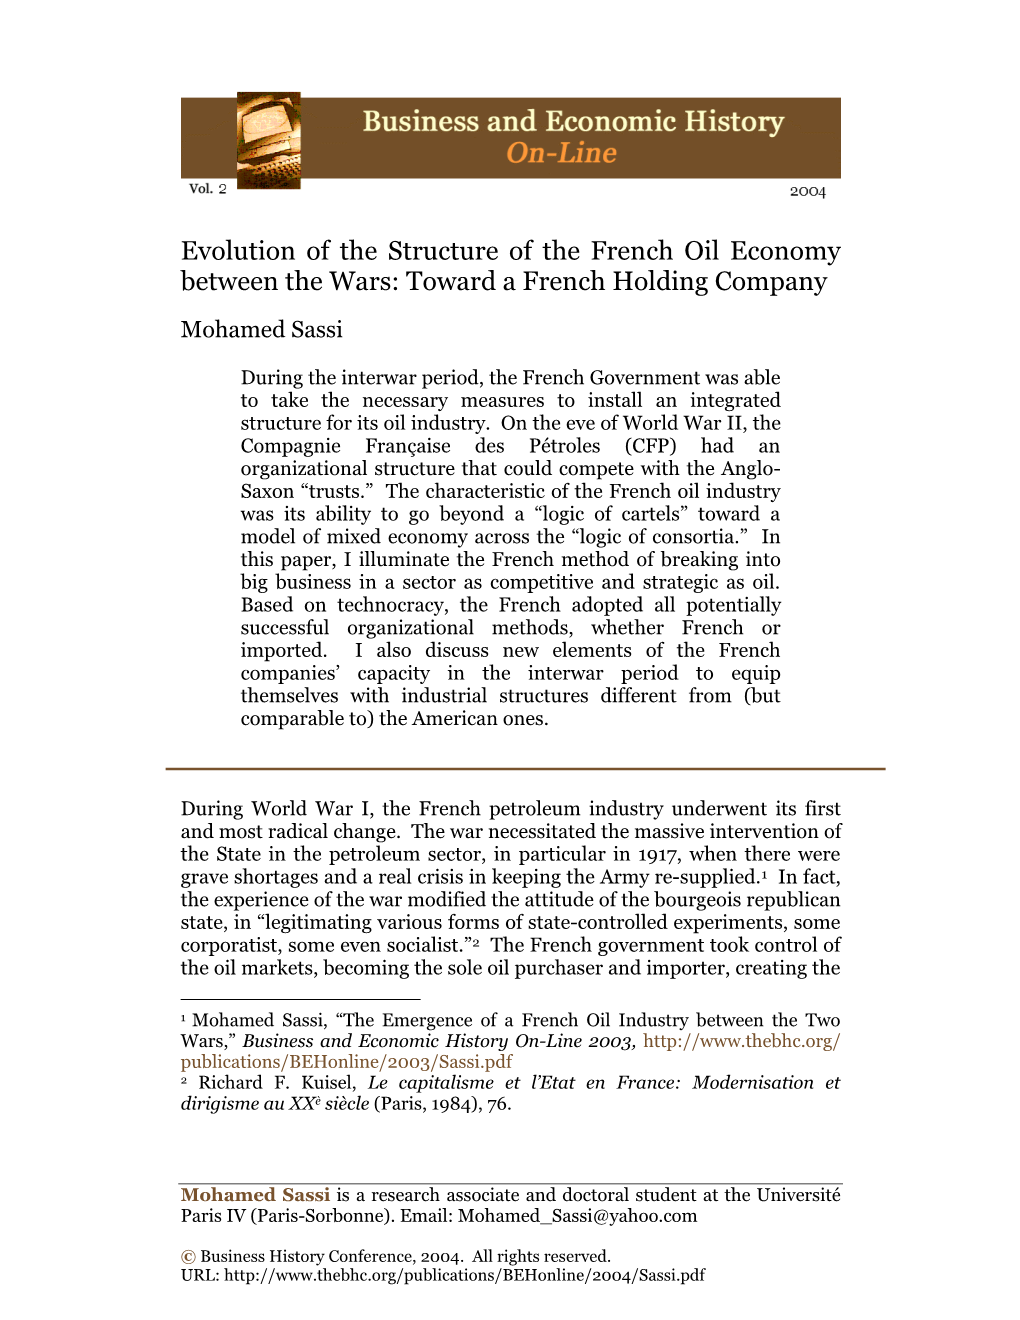 Evolution of the Structure of the French Oil Economy During The